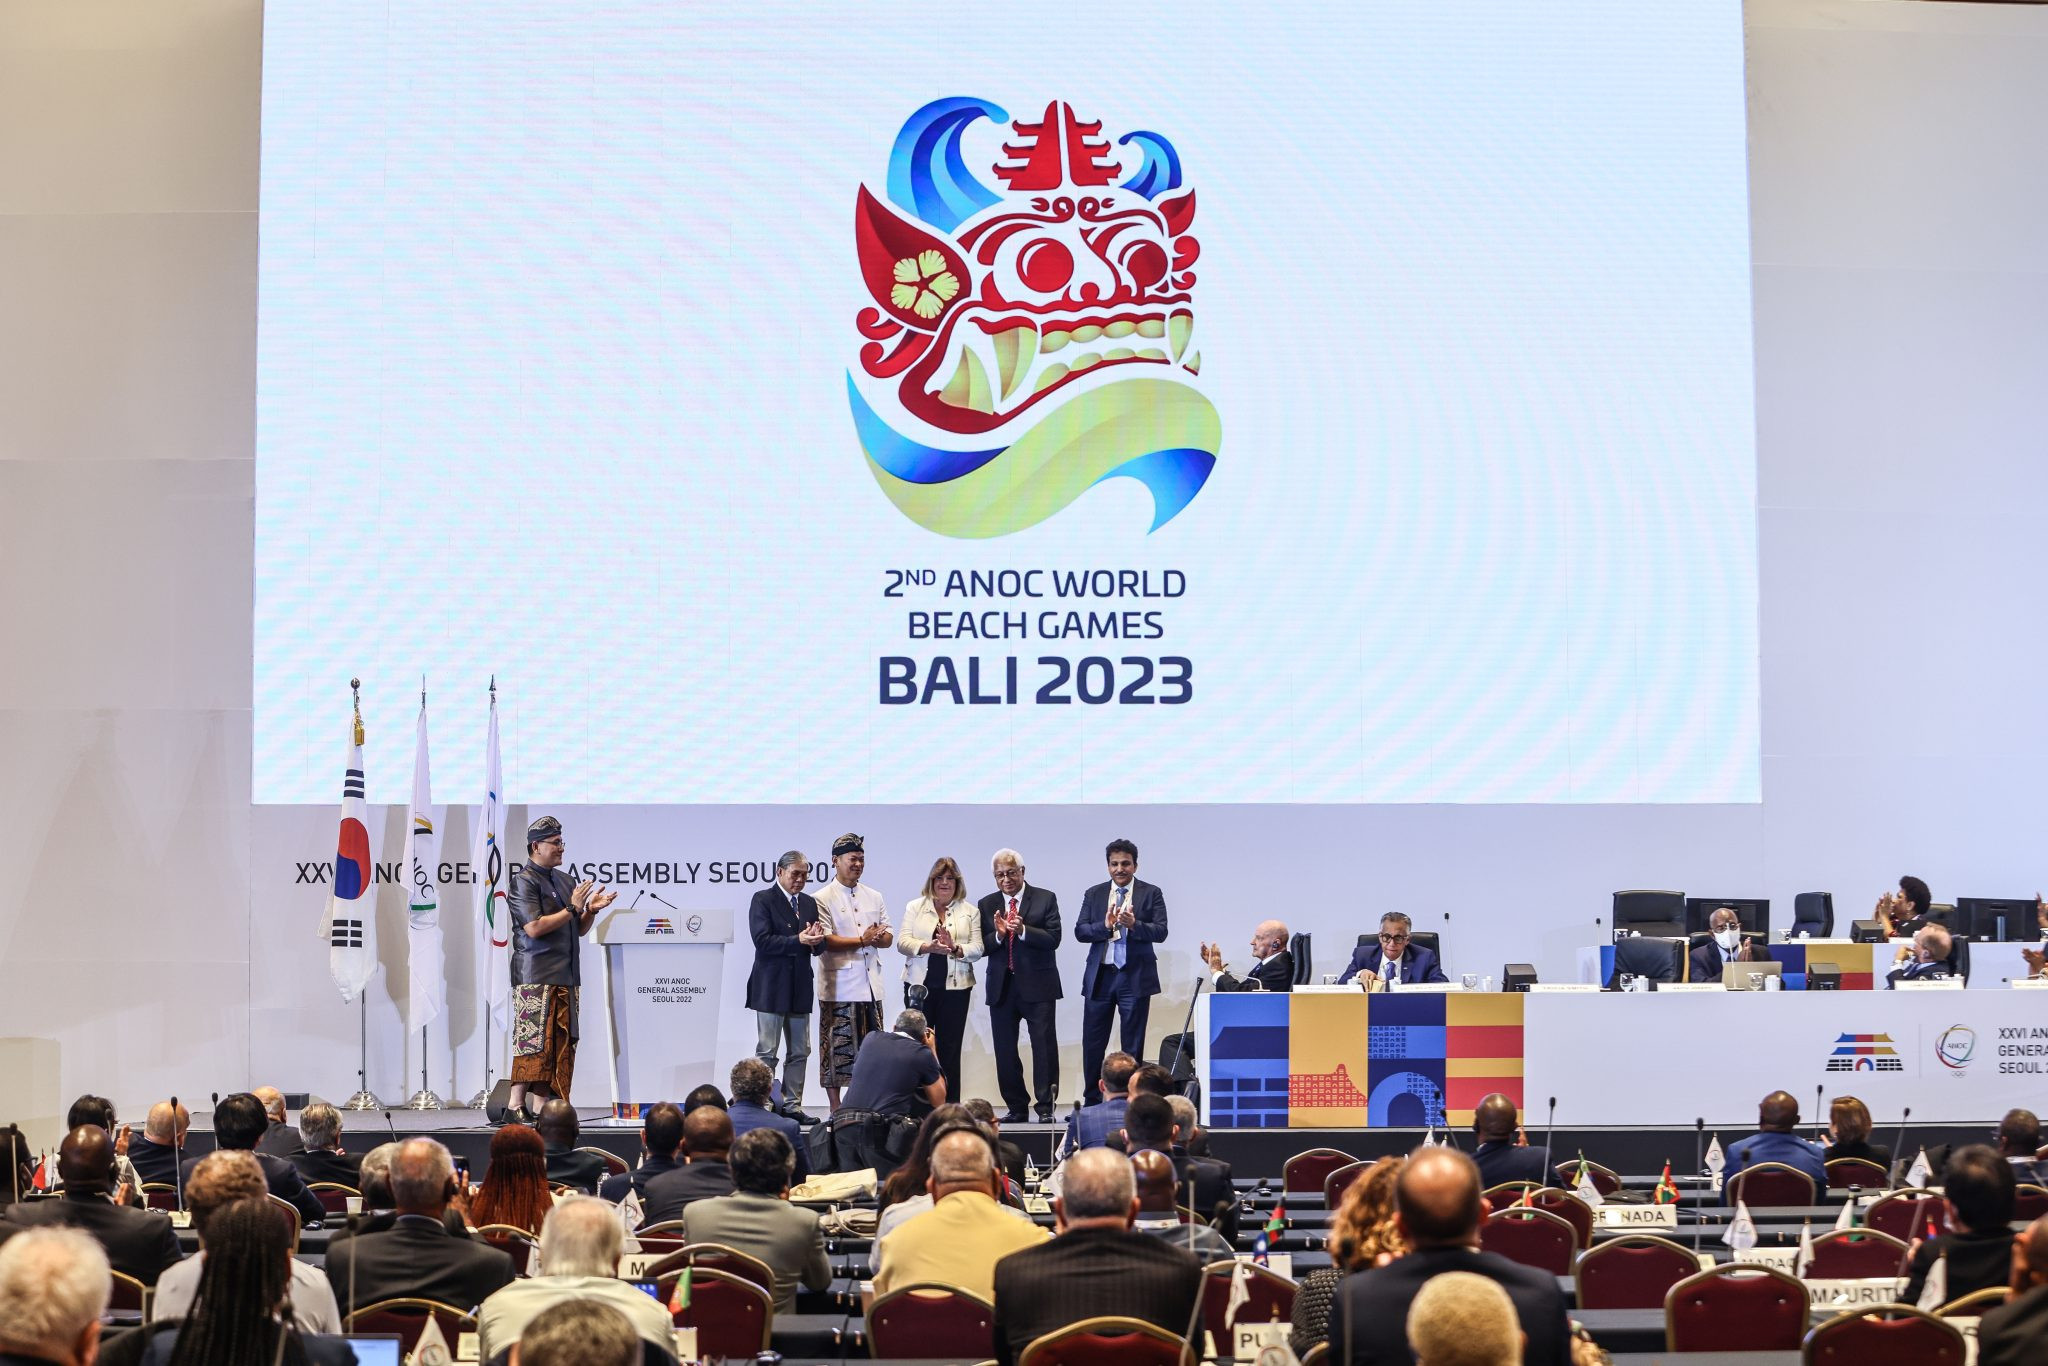 New Indonesian Sports Minister vows to "bridge communication" on Israel at ANOC World Beach Games